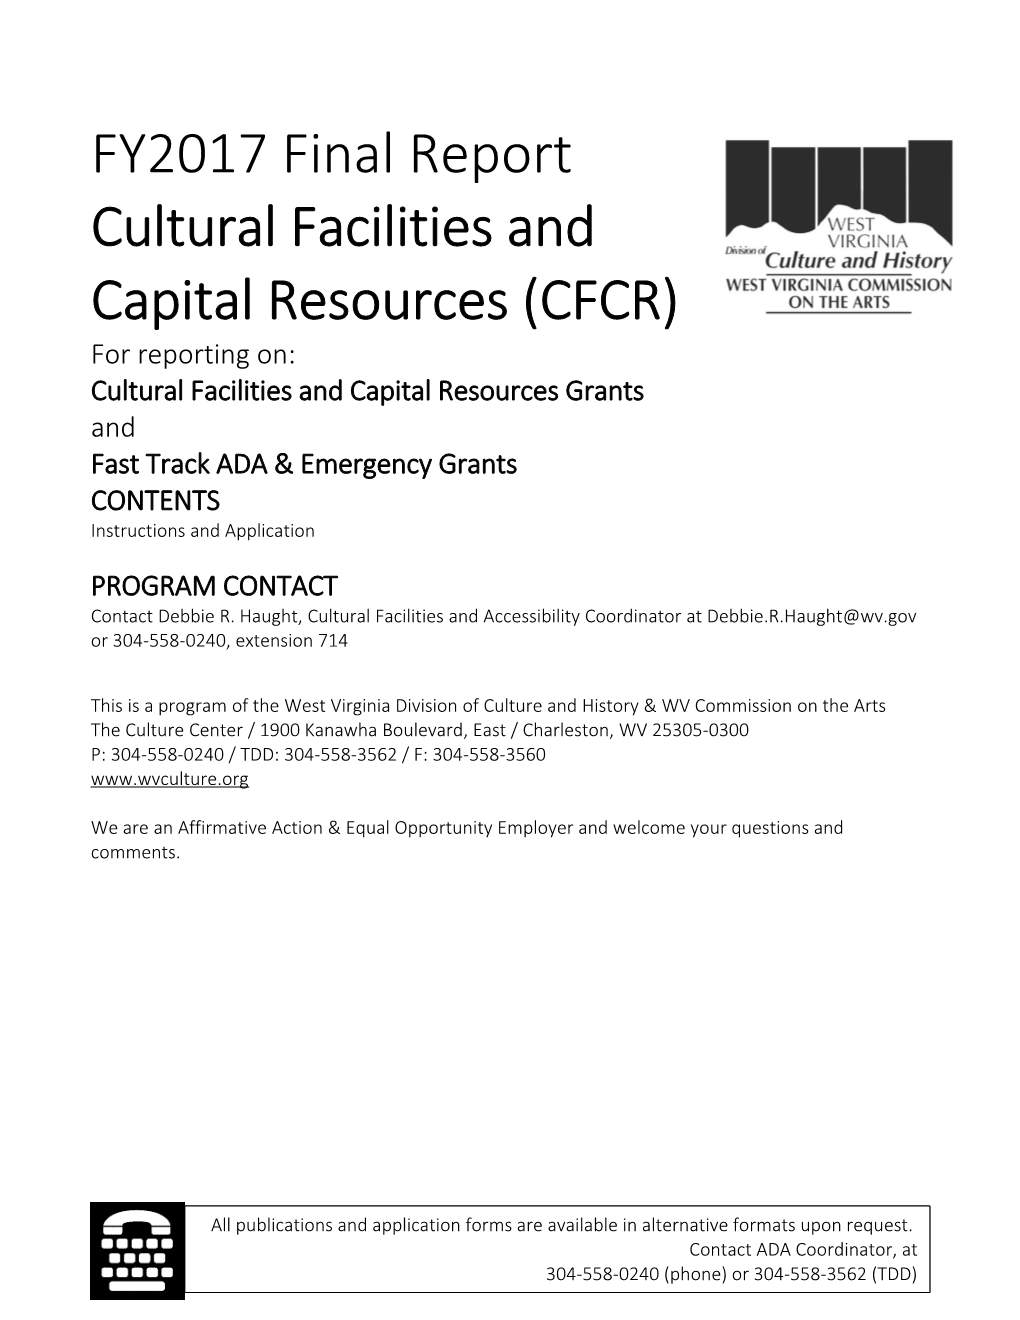 Cultural Facilities and Capital Resources (CFCR)